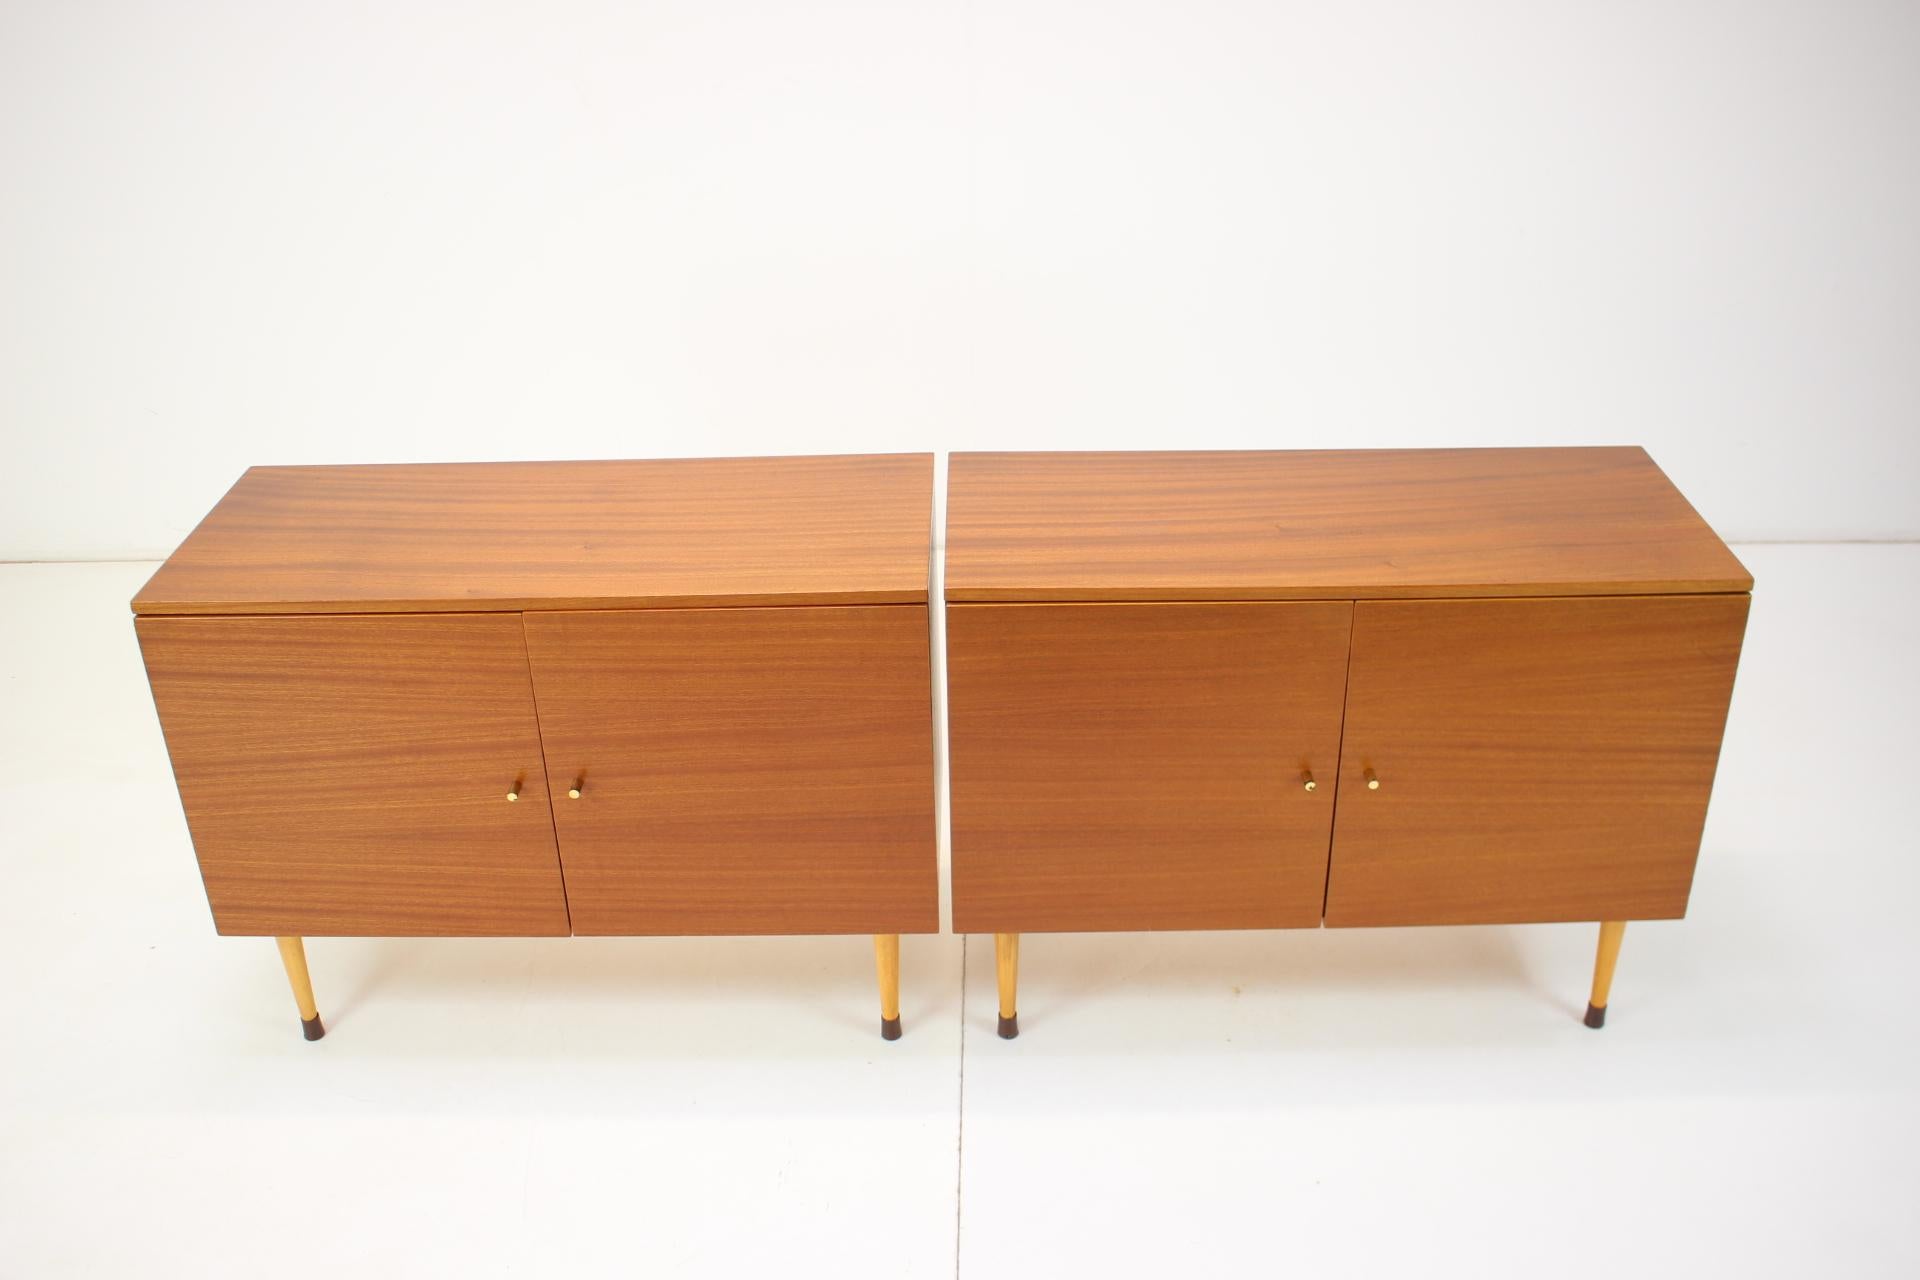 - Made in Czechoslovakia
- Made of wood, veneer
- Good, original condition
- Label: Furniture of first class quality.